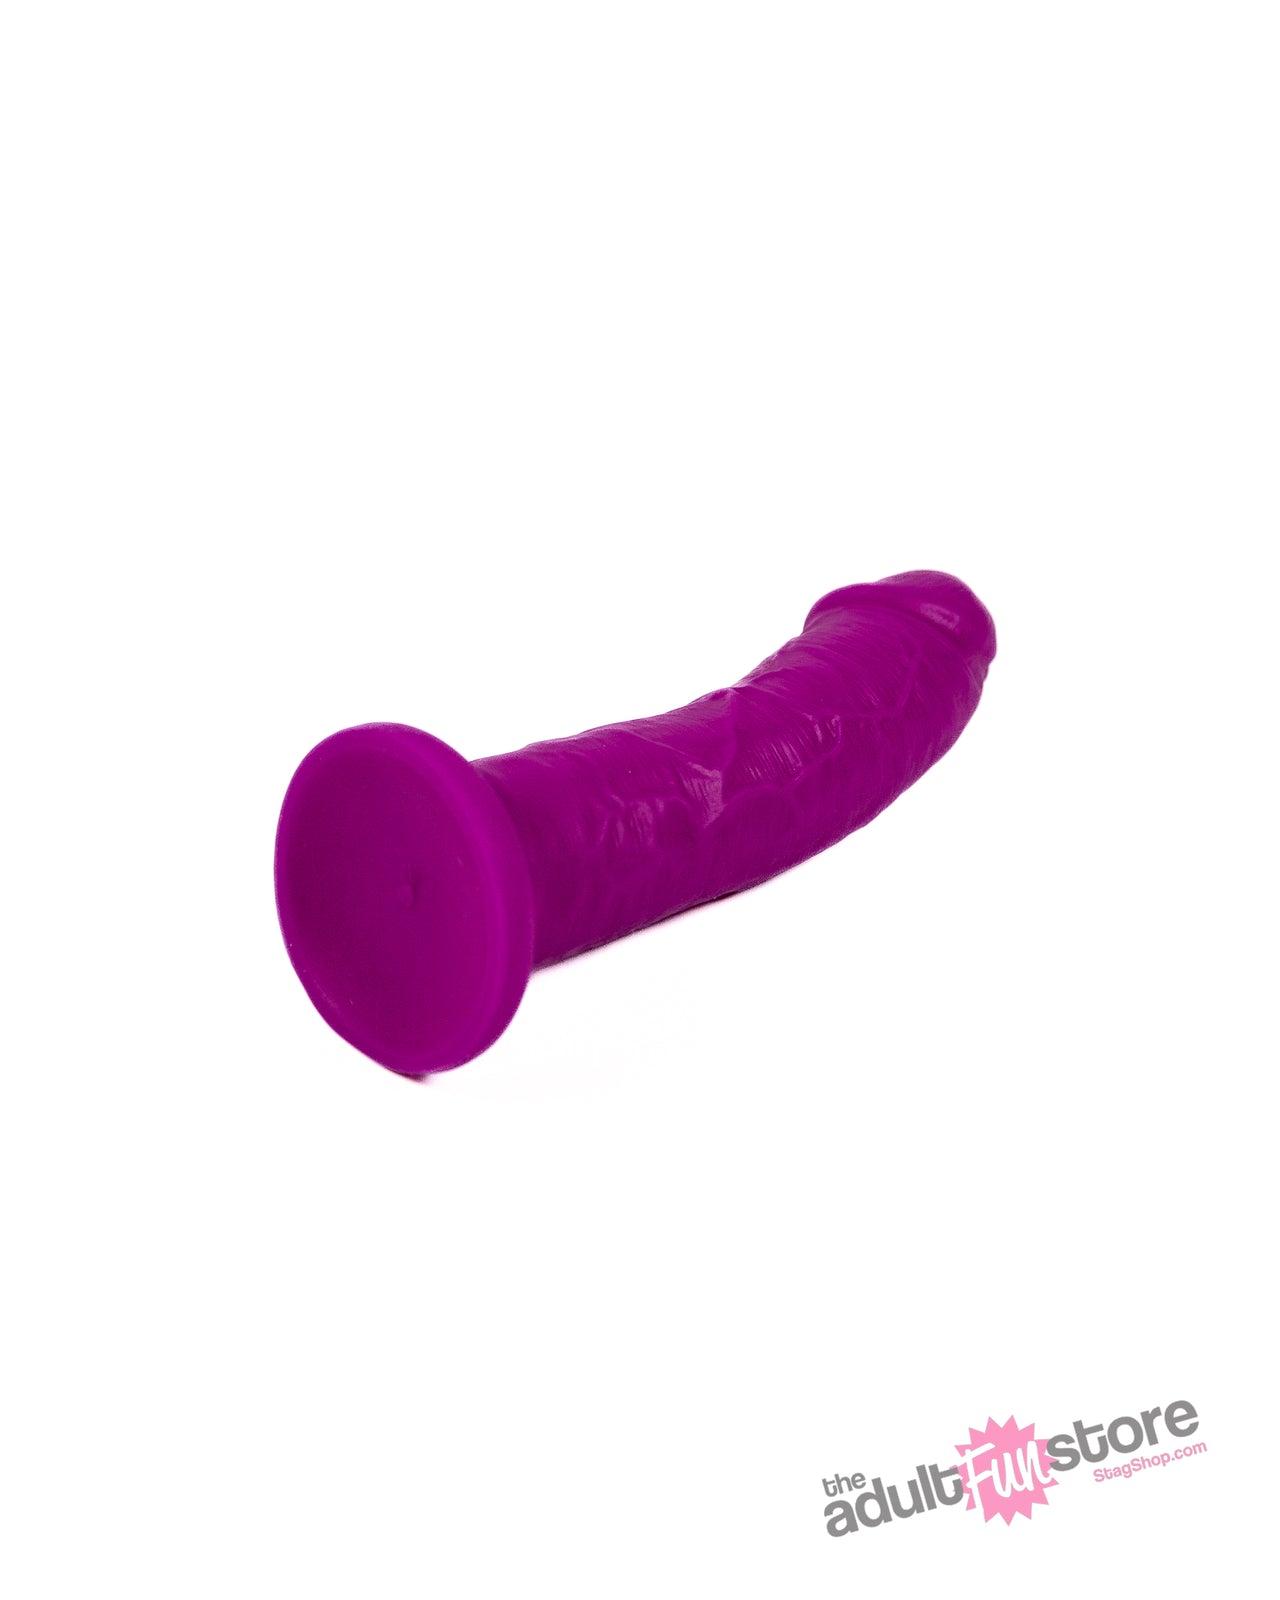 NS Novelties - Colours - 7 Inch Dual Density Girth Dildo - Assorted Colours - Stag Shop